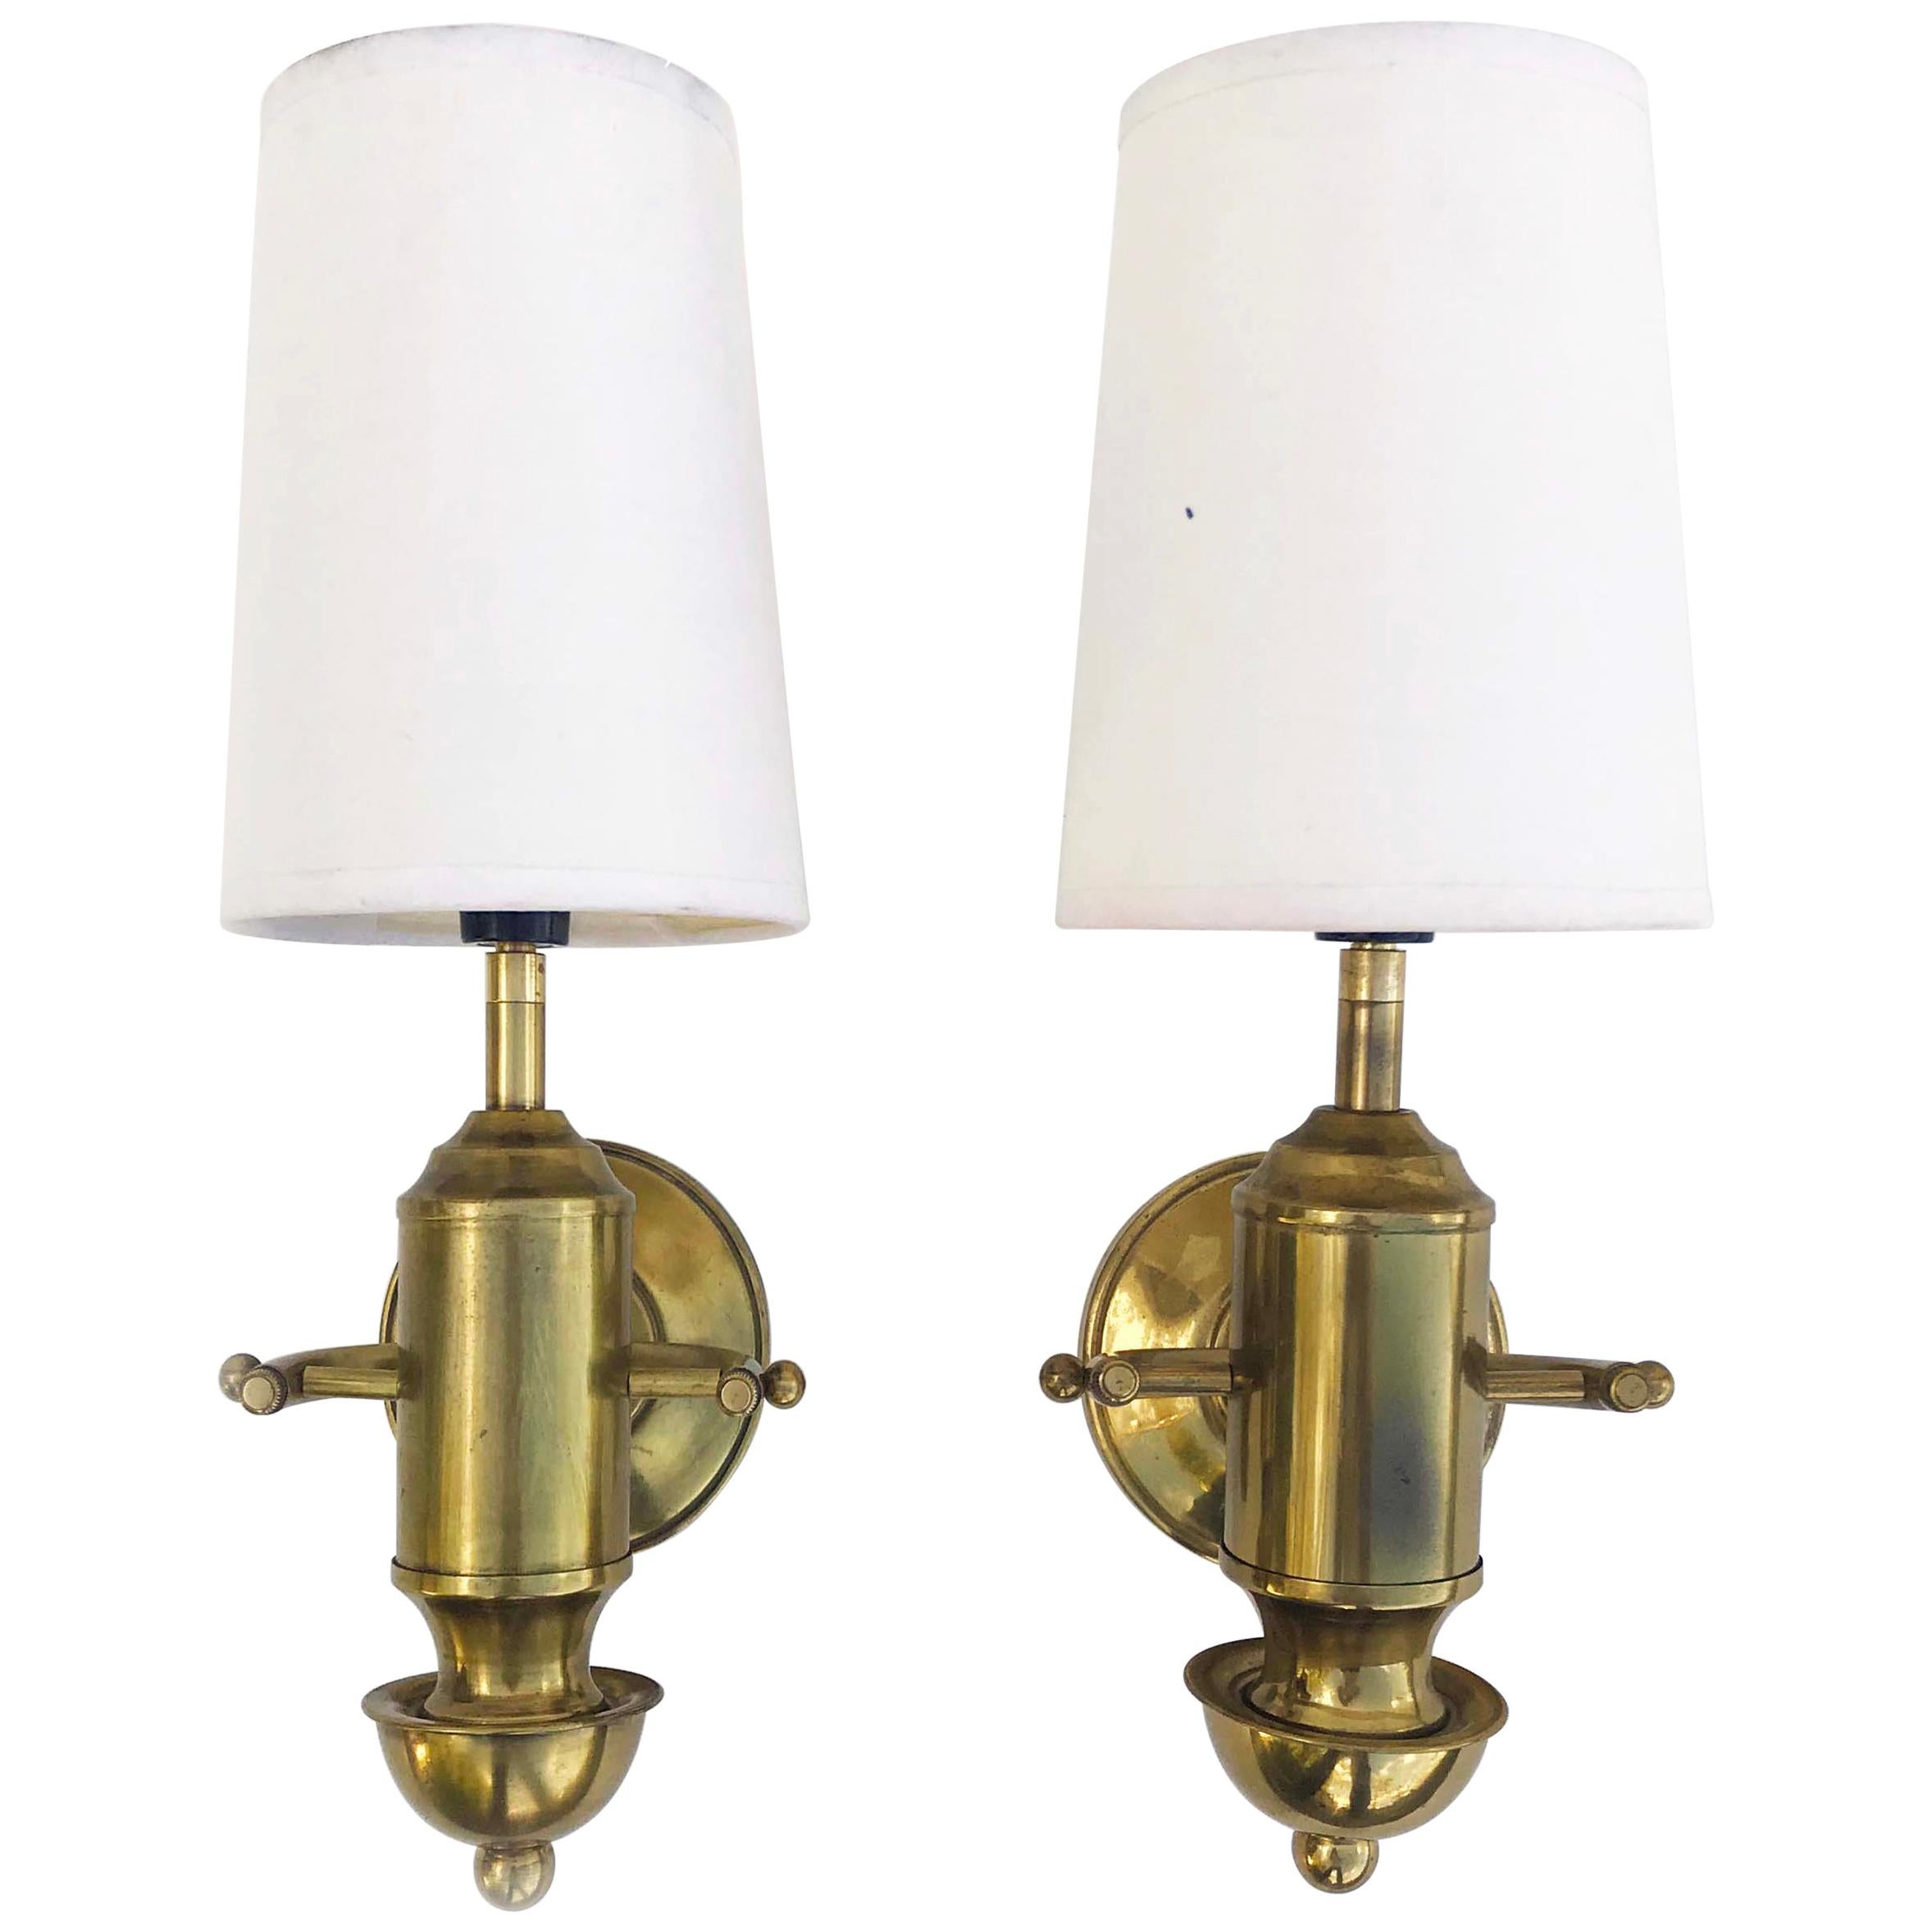 Pair of Nautical French Sconces